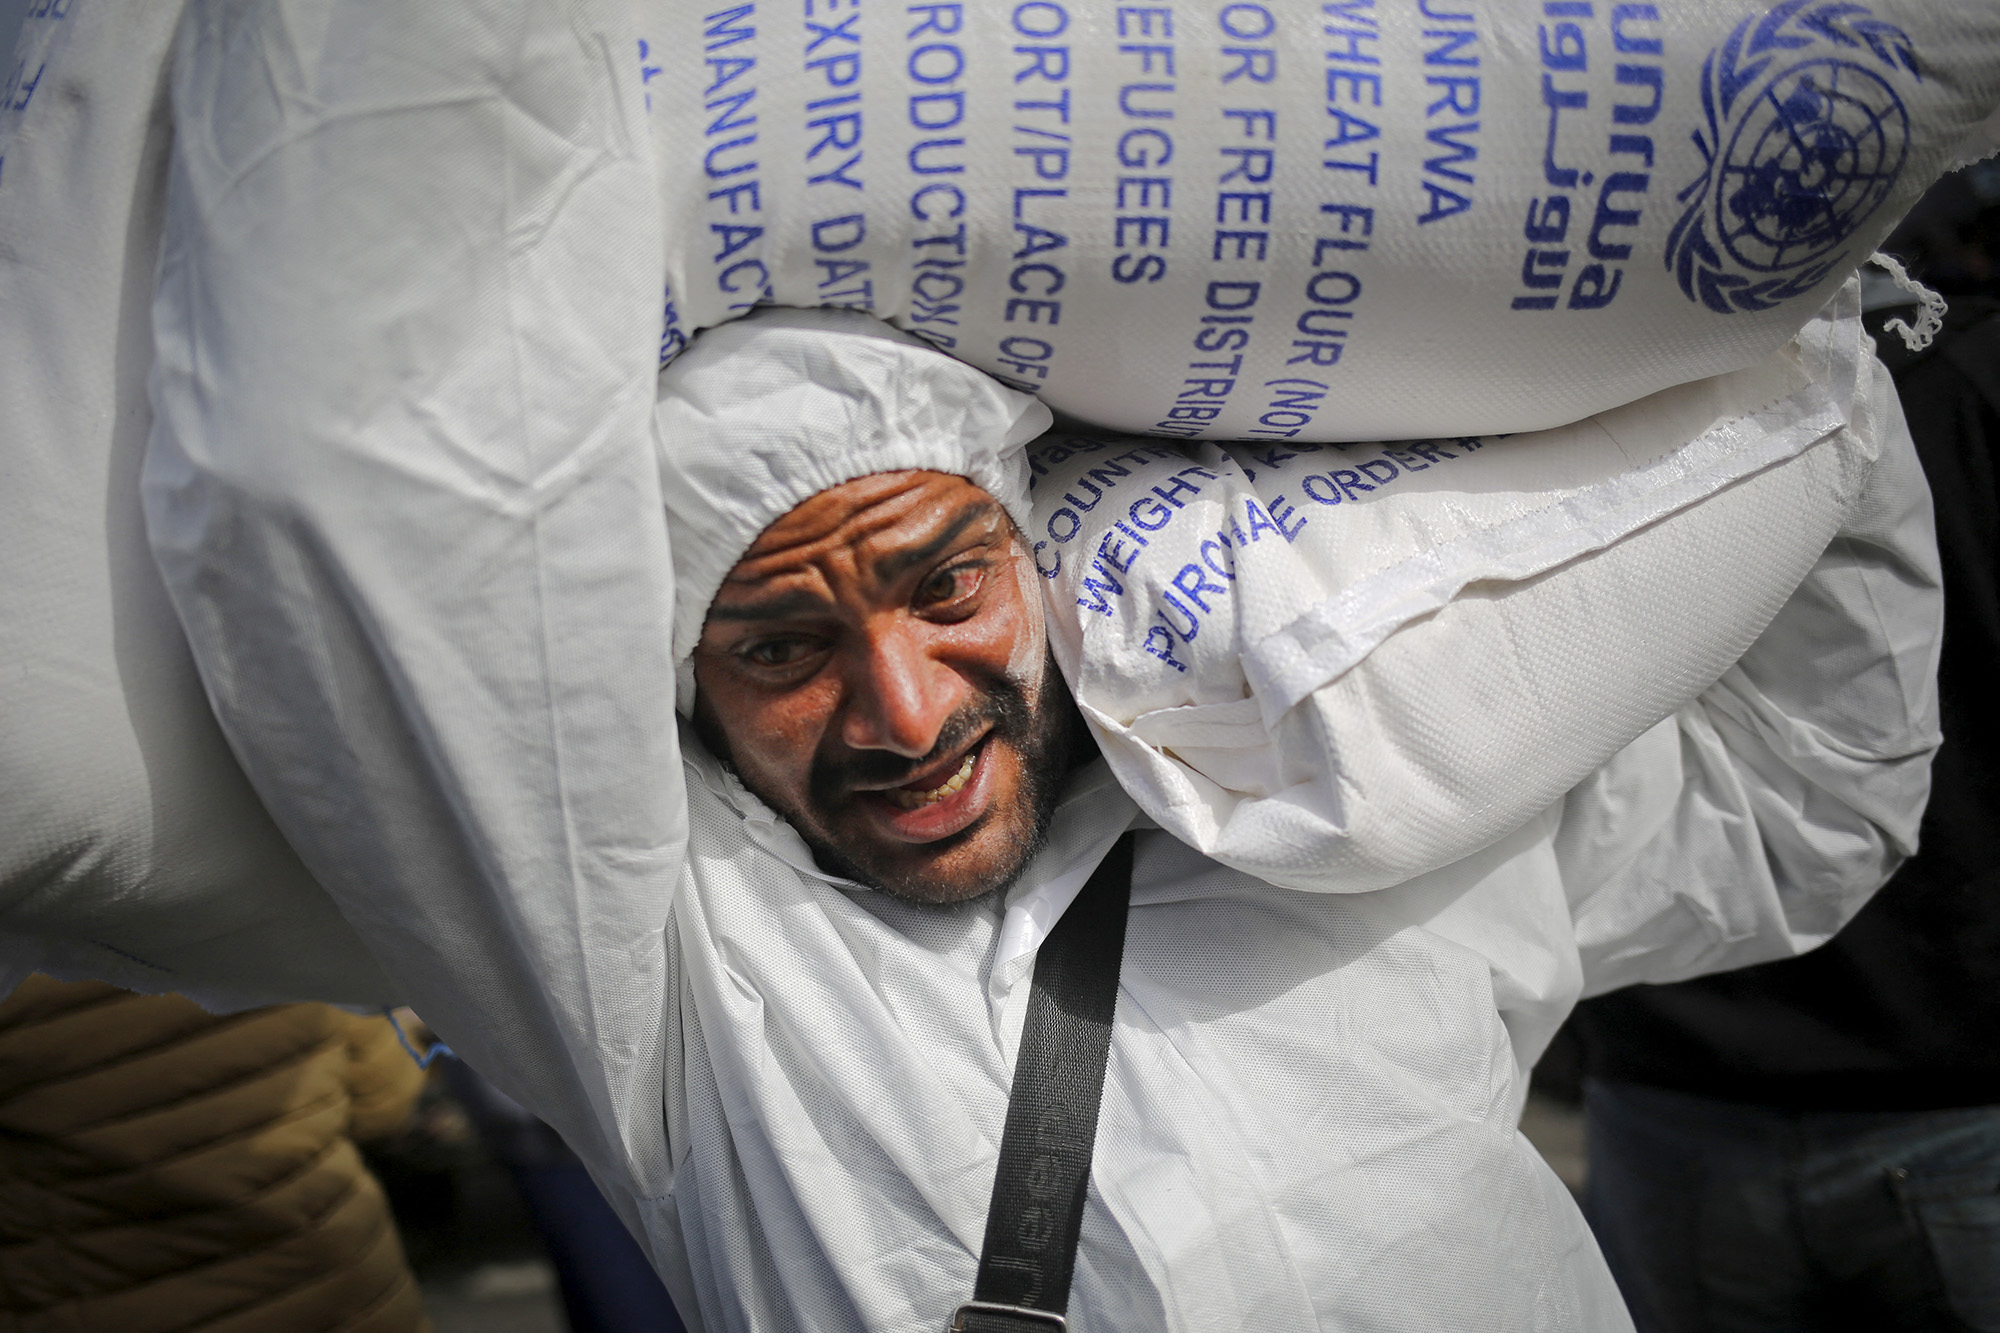 A Palestinian man carries sacks of humanitarian aid at the distribution center of the United Nations Relief and Works Agency for Palestine Refugees (UNRWA) in Rafah, Gaza, on March 3.